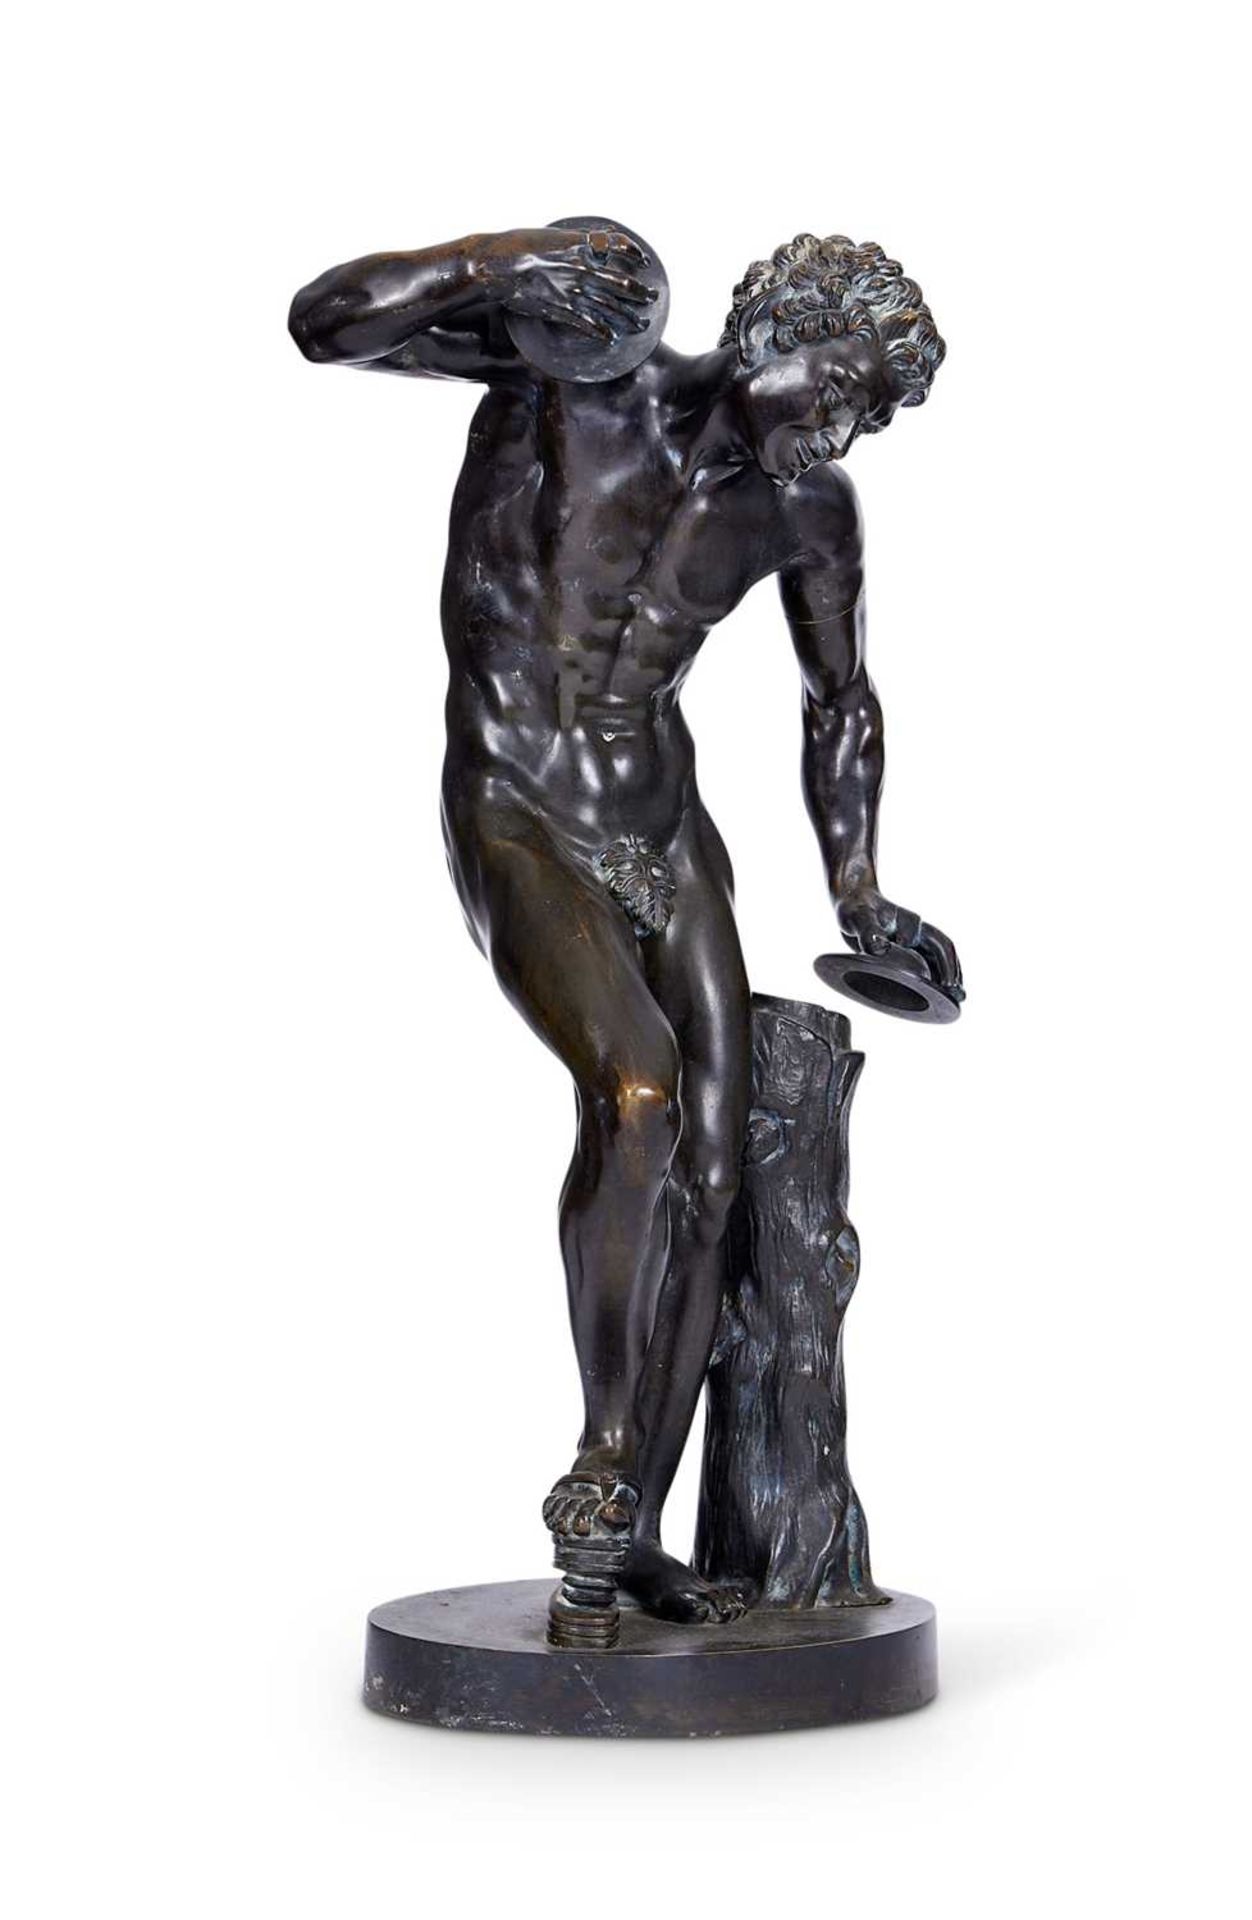 AFTER THE ANTIQUE: A 19TH CENTURY BRONZE OF THE DANCING FAUN WITH CYMBALS - Image 6 of 9